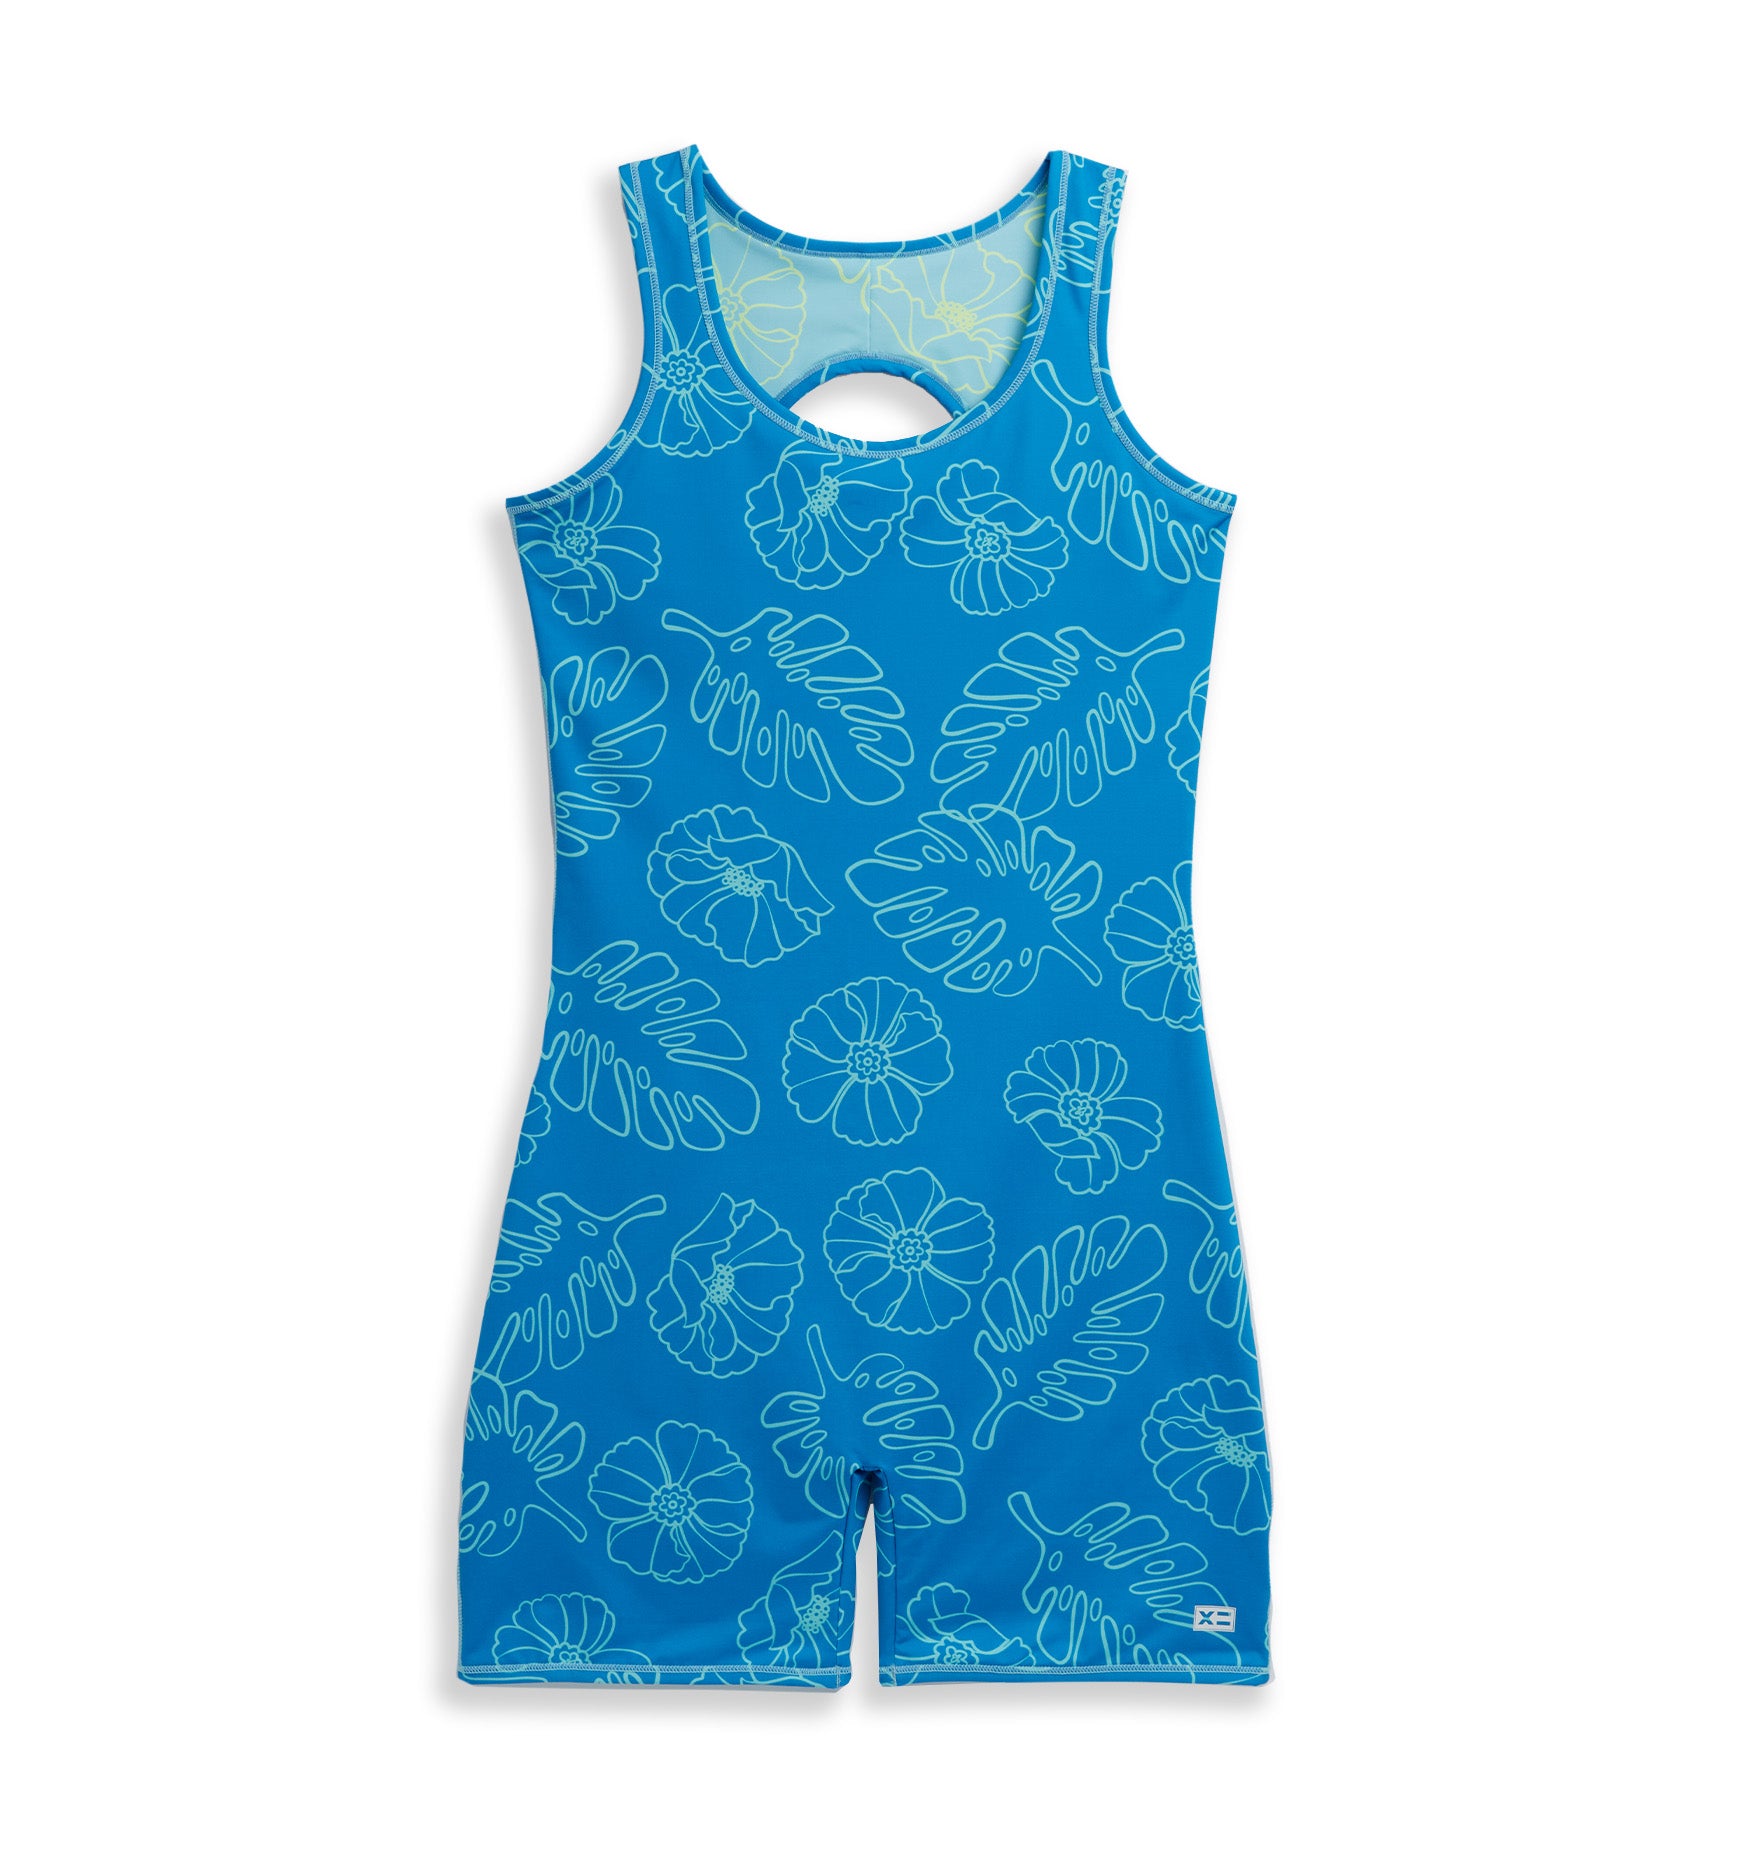 TomboyX Swim 6 Racerback Unisuit, Fullly Lined, One Piece Bathing Suit ,  UPF 50 Sun Protection, Plus Size Inclusive (XS-6X) Royal X Small